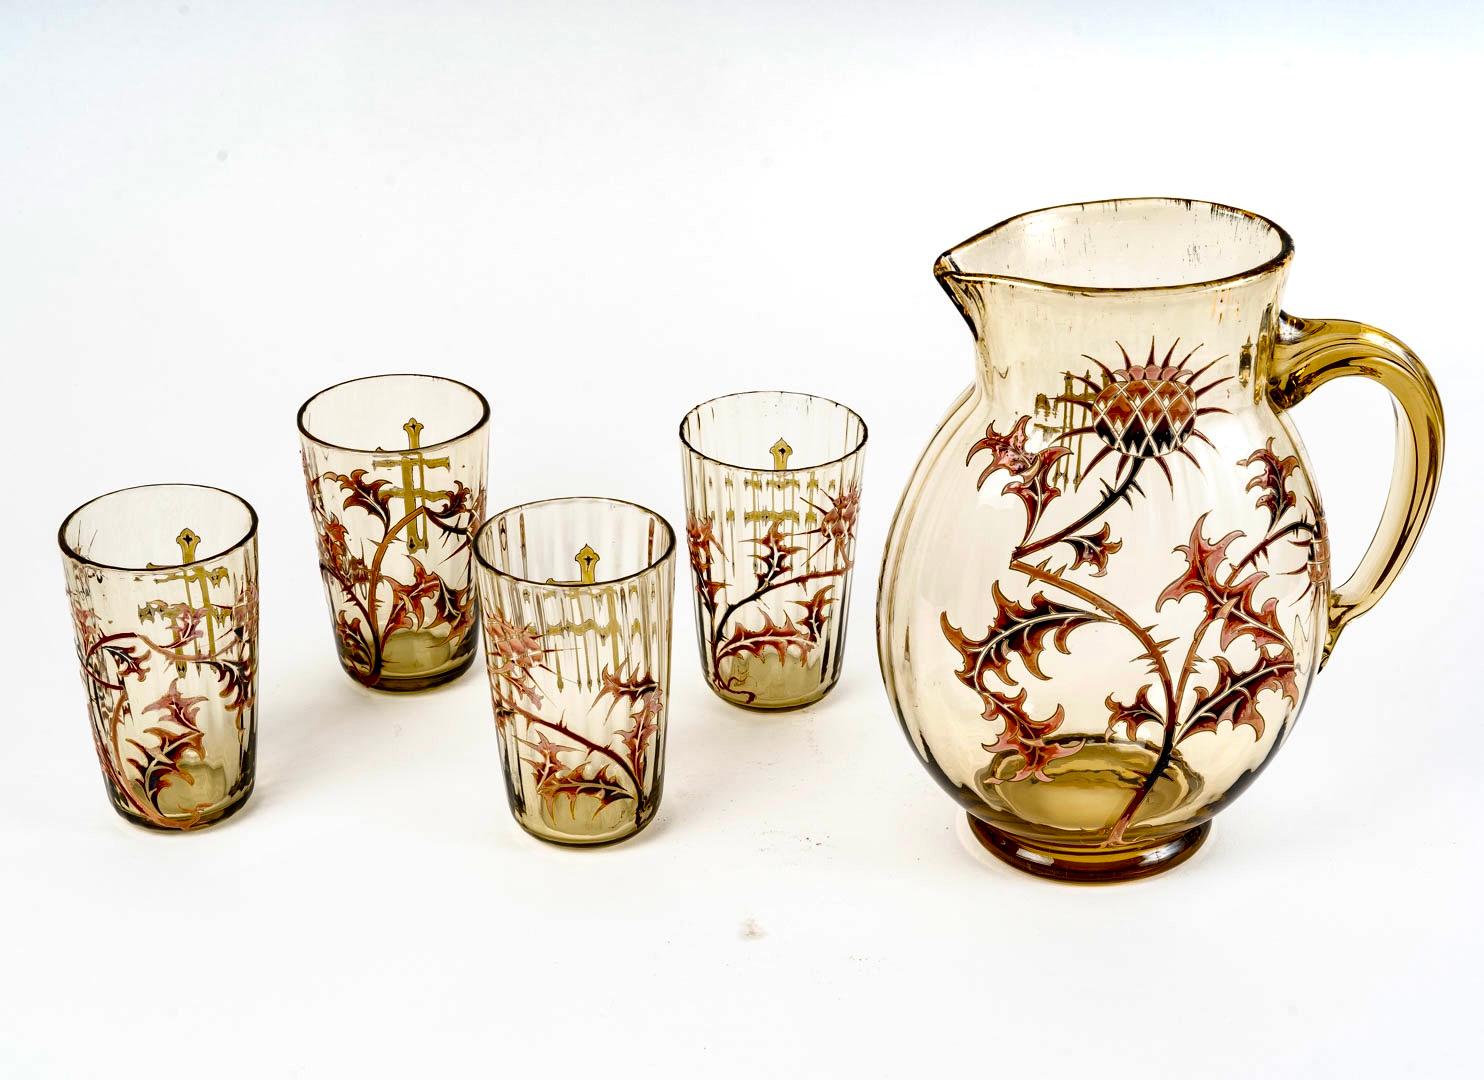 Orangeade set made in yellow glass with enameldesign of thistles by Emile Gallé.
Signature under each piece.

All pieces are in perfect condition.

Service of 5 pieces including:
- 1 pitcher 24 cm high
- 4 glasses 12 cm high.